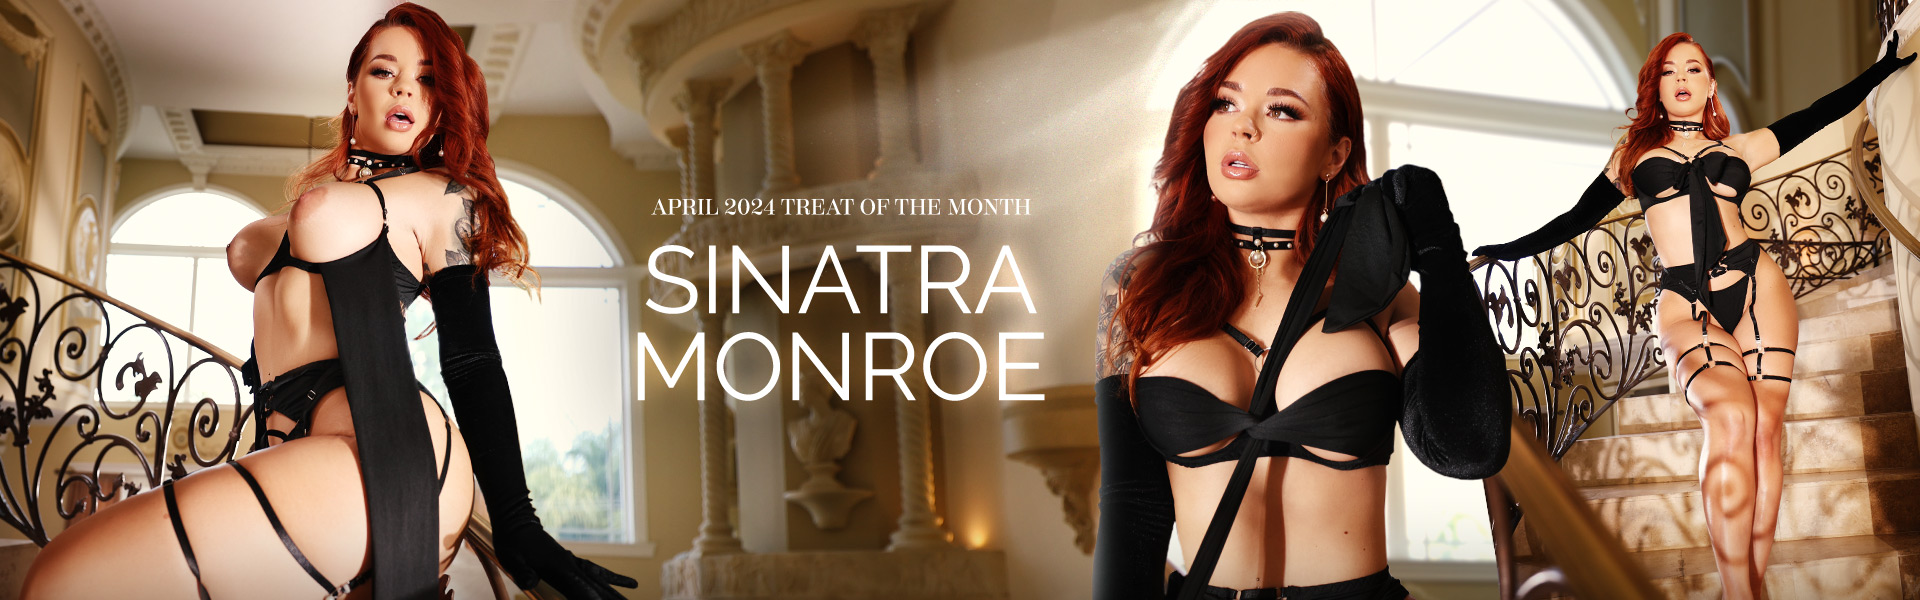 Check Sinatra Monroe's special video for Twistys Treat of the Month March 2024